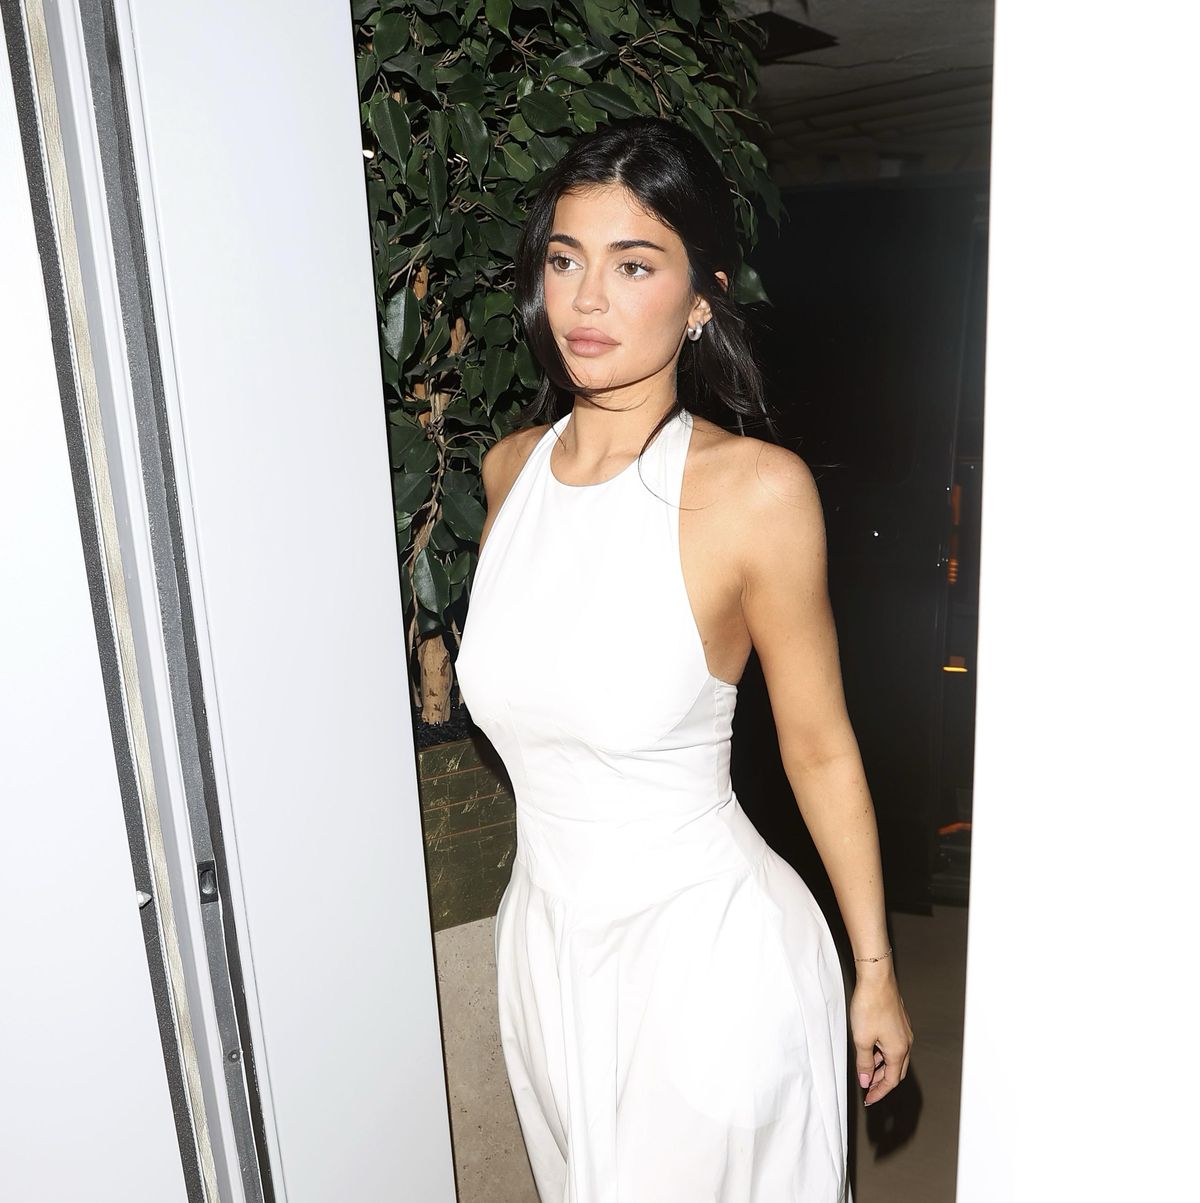 Kylie Jenner's Closet Designer Swears By These Hacks